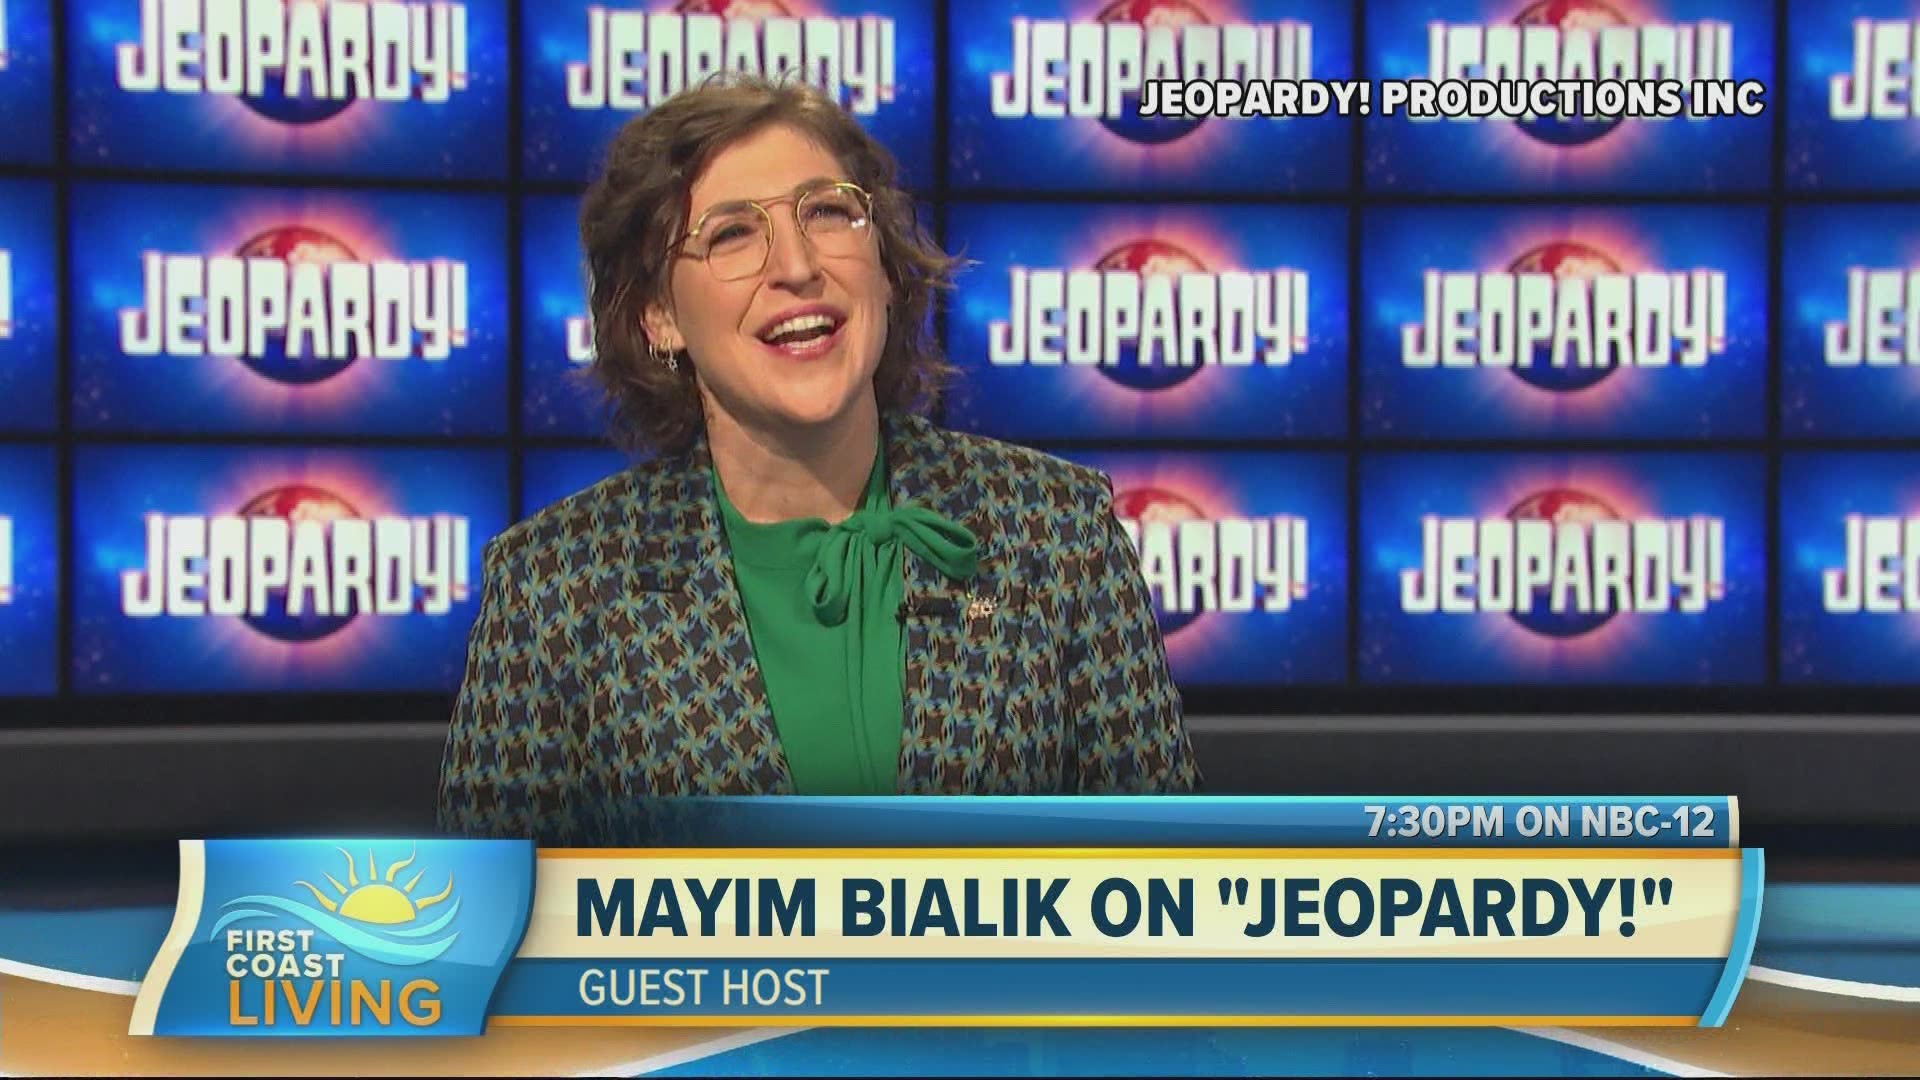 You know her from "The Big Bang Theory," now she's guest hosting "Jeopardy!"